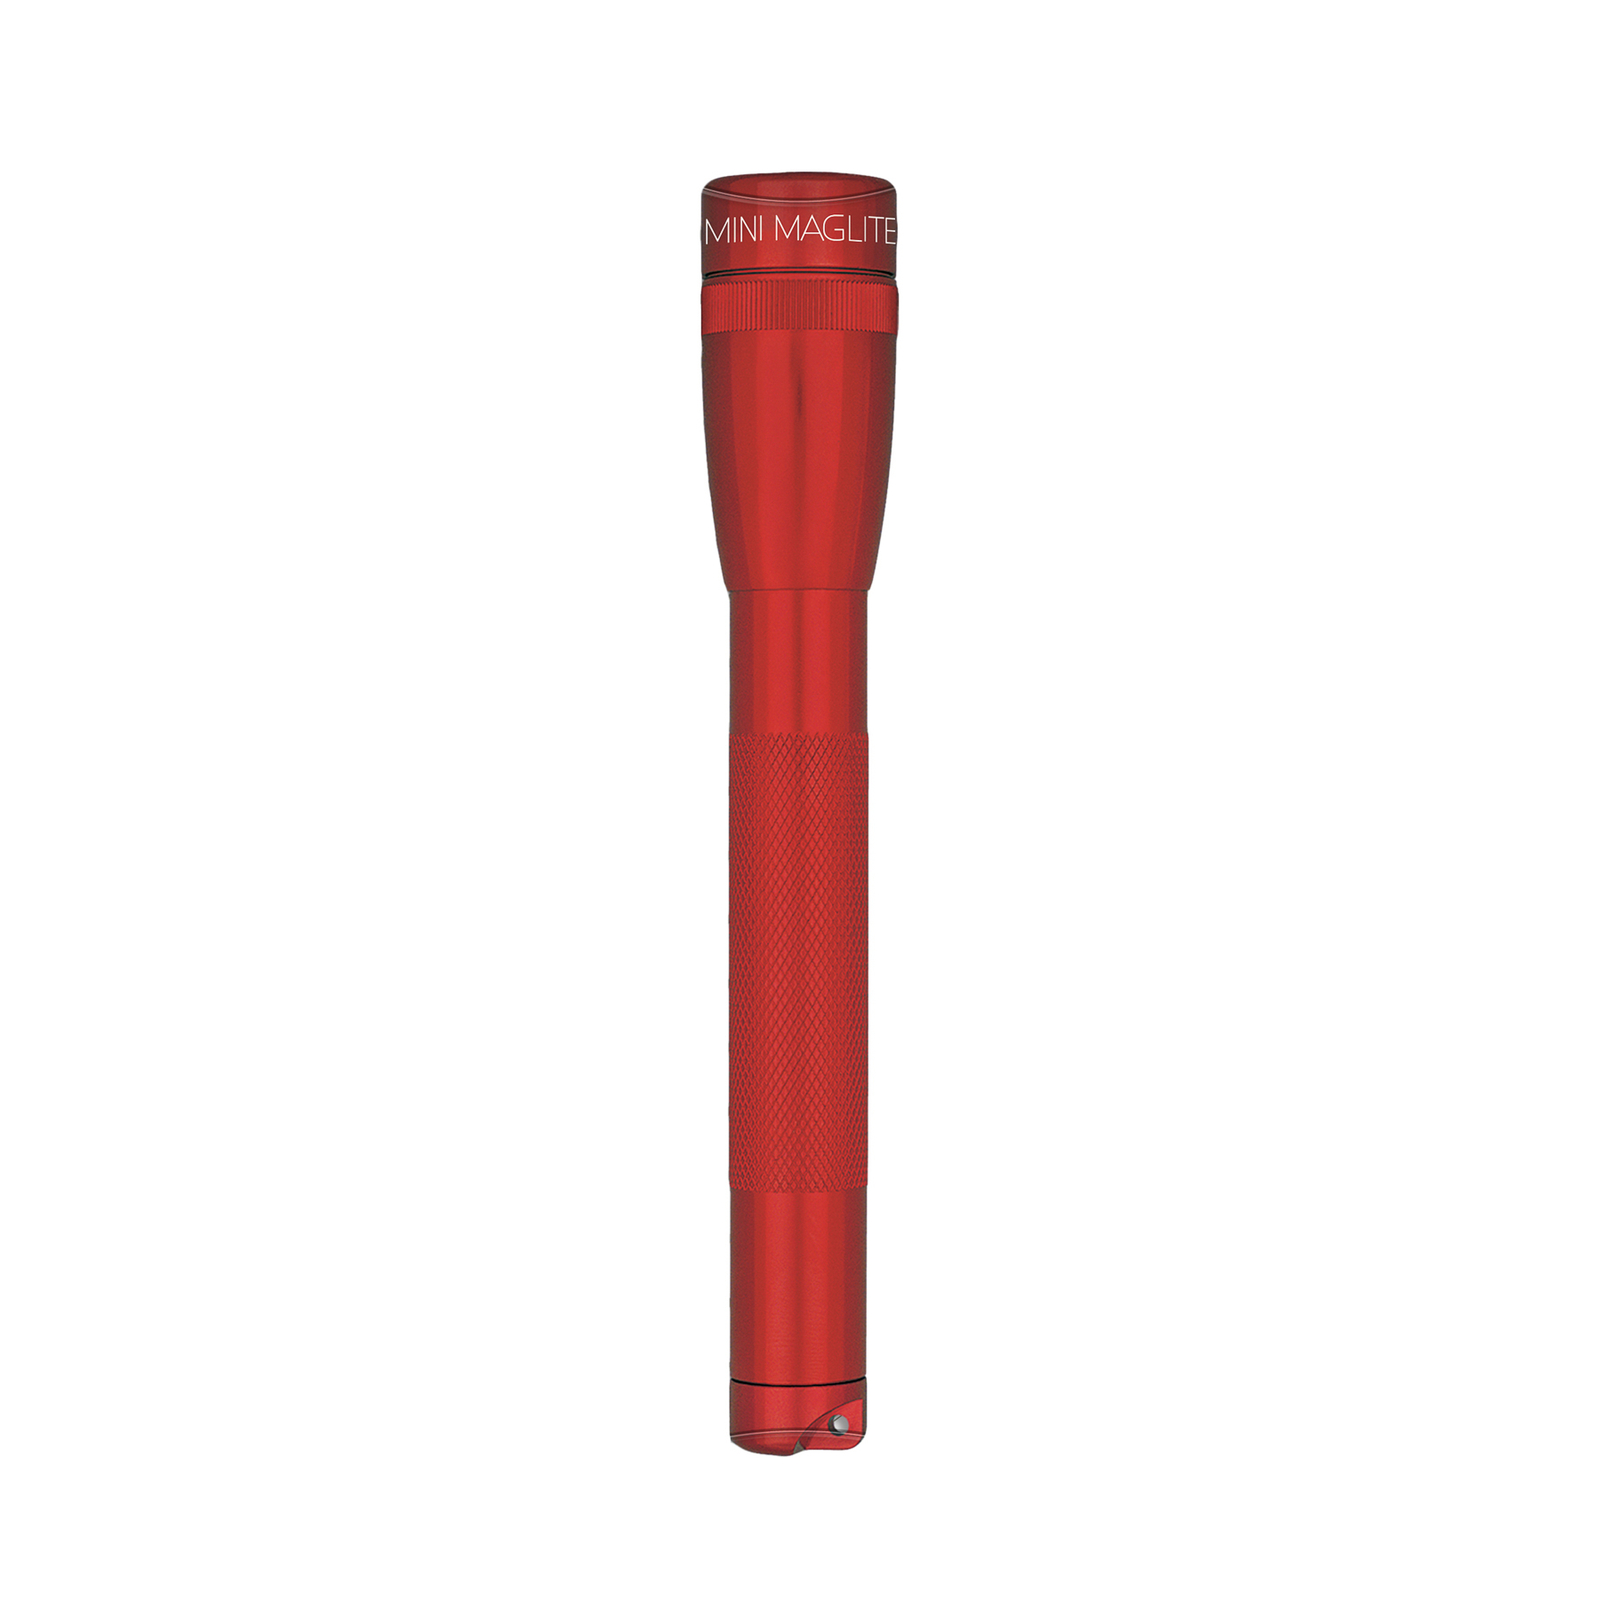 Maglite LED torch Mini, 2-Cell AA, Holster, red